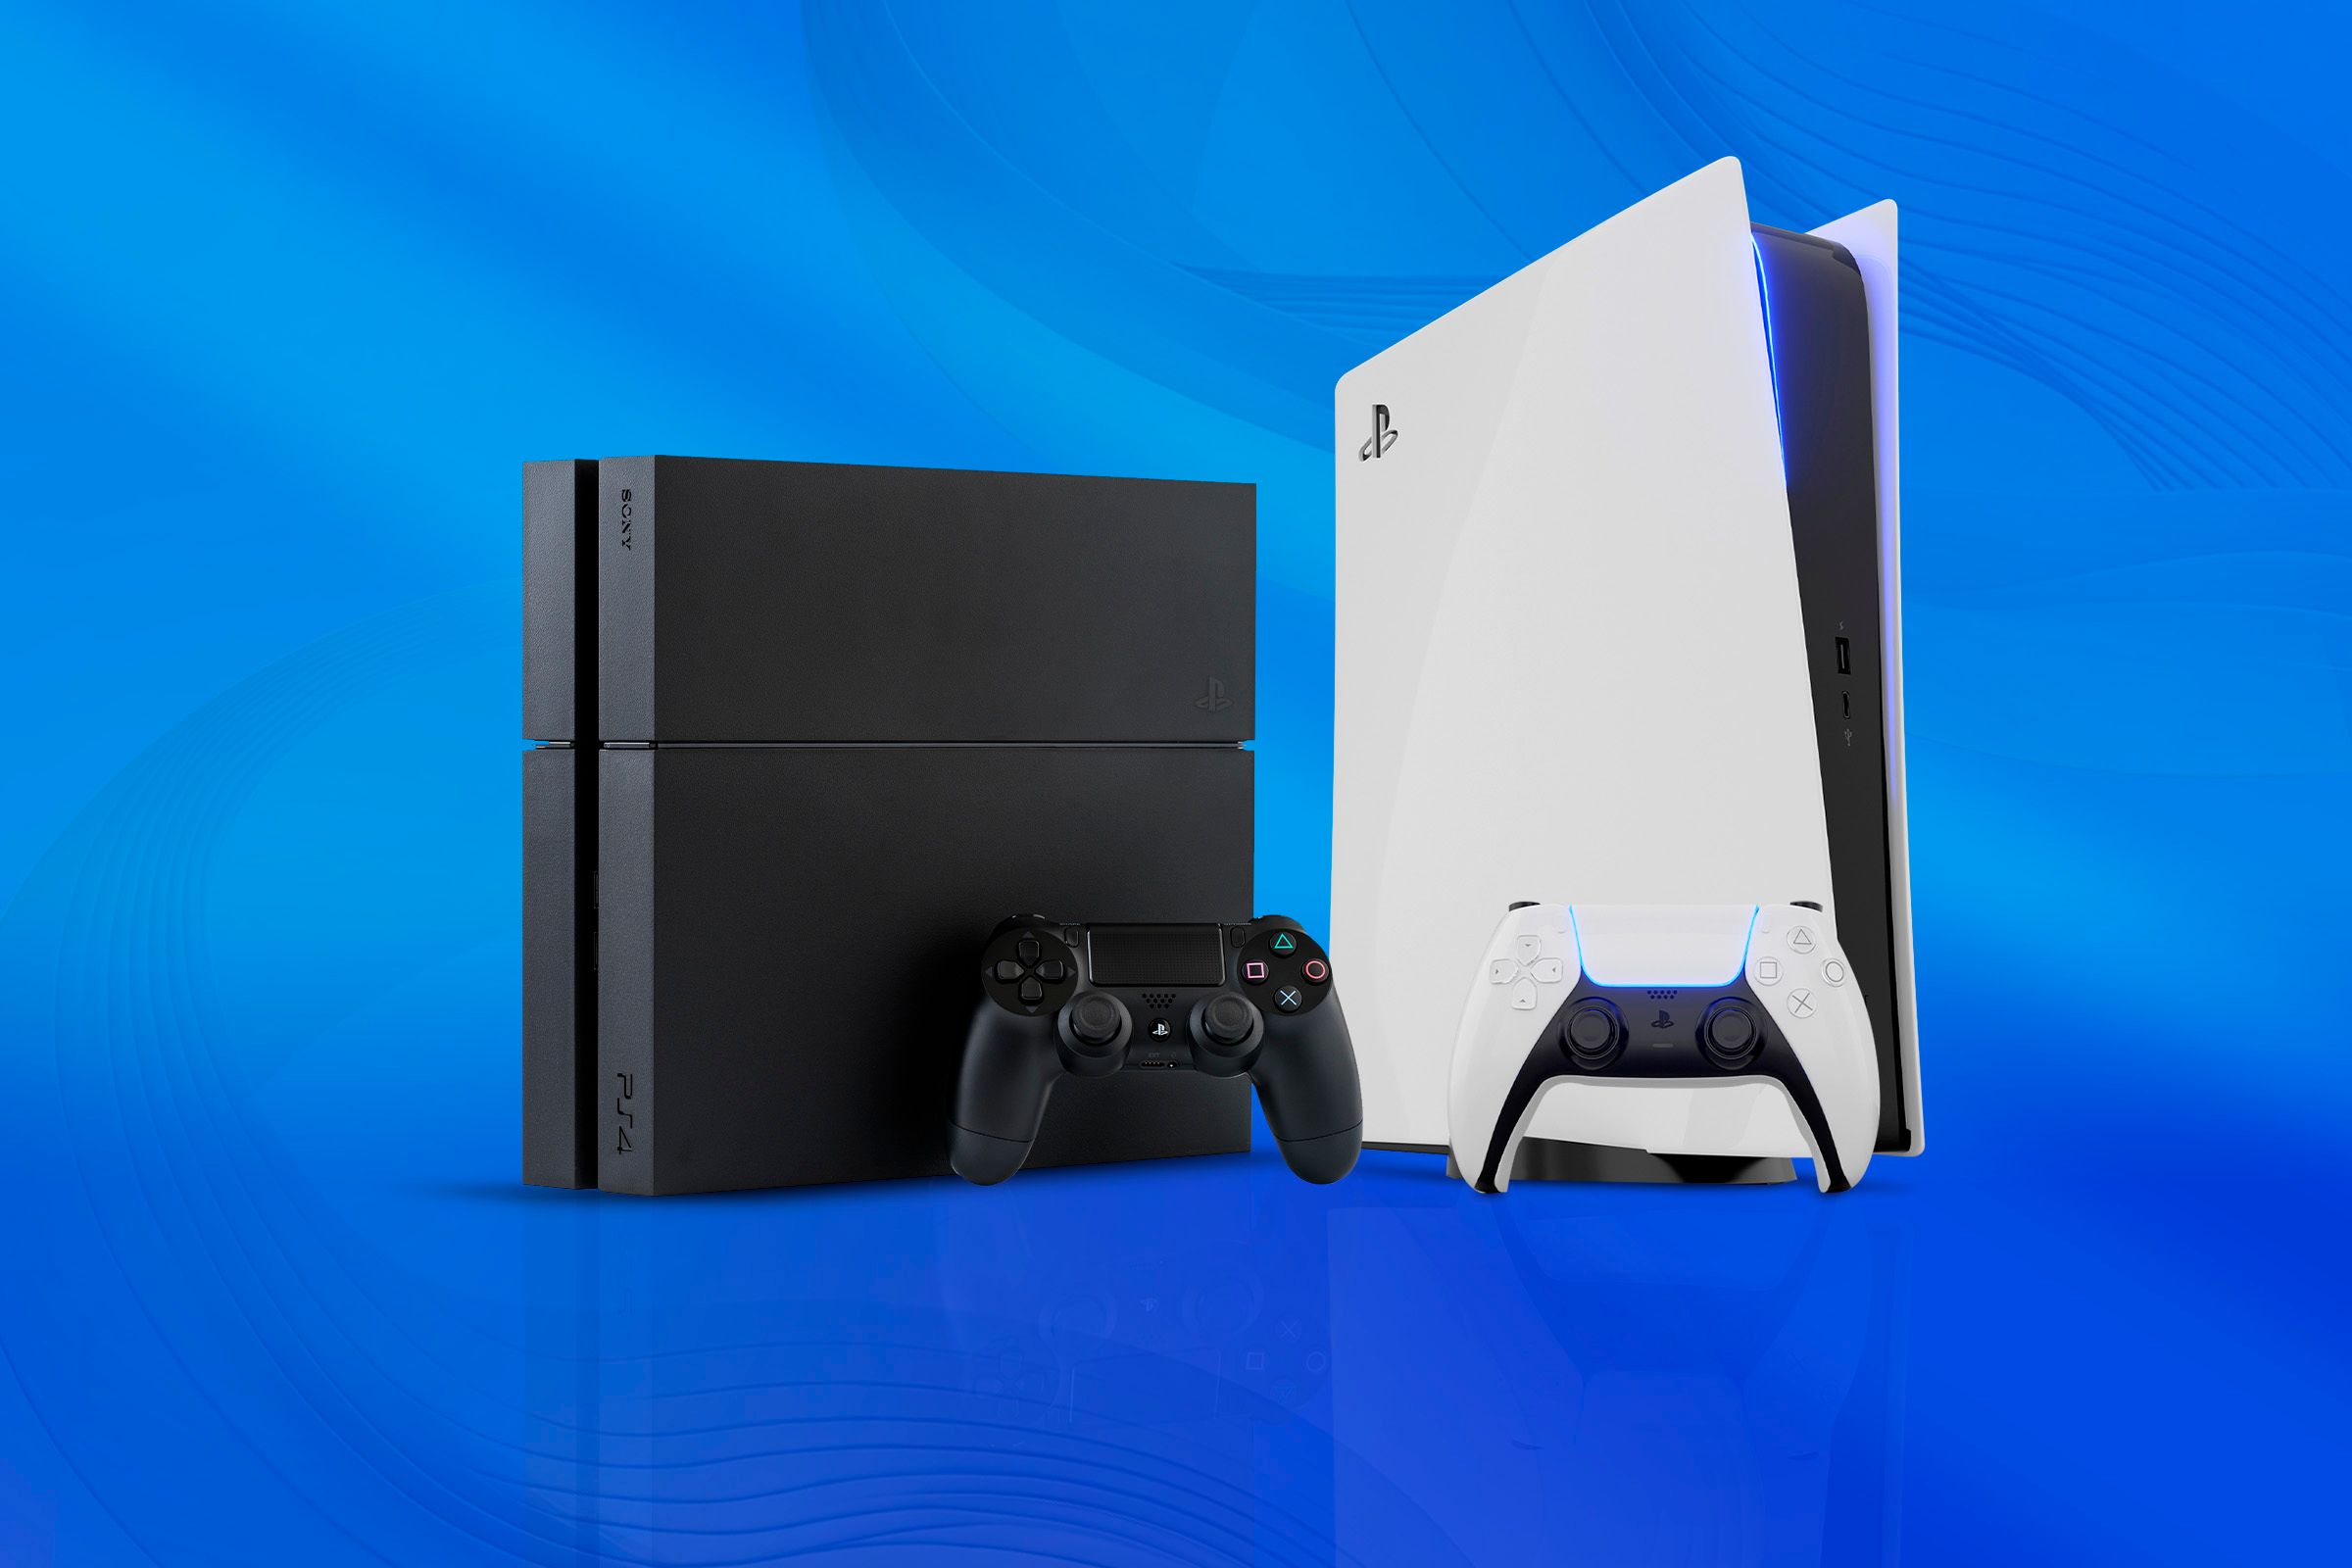 A PlayStation 4 and a PlayStation 5 against a blue background.